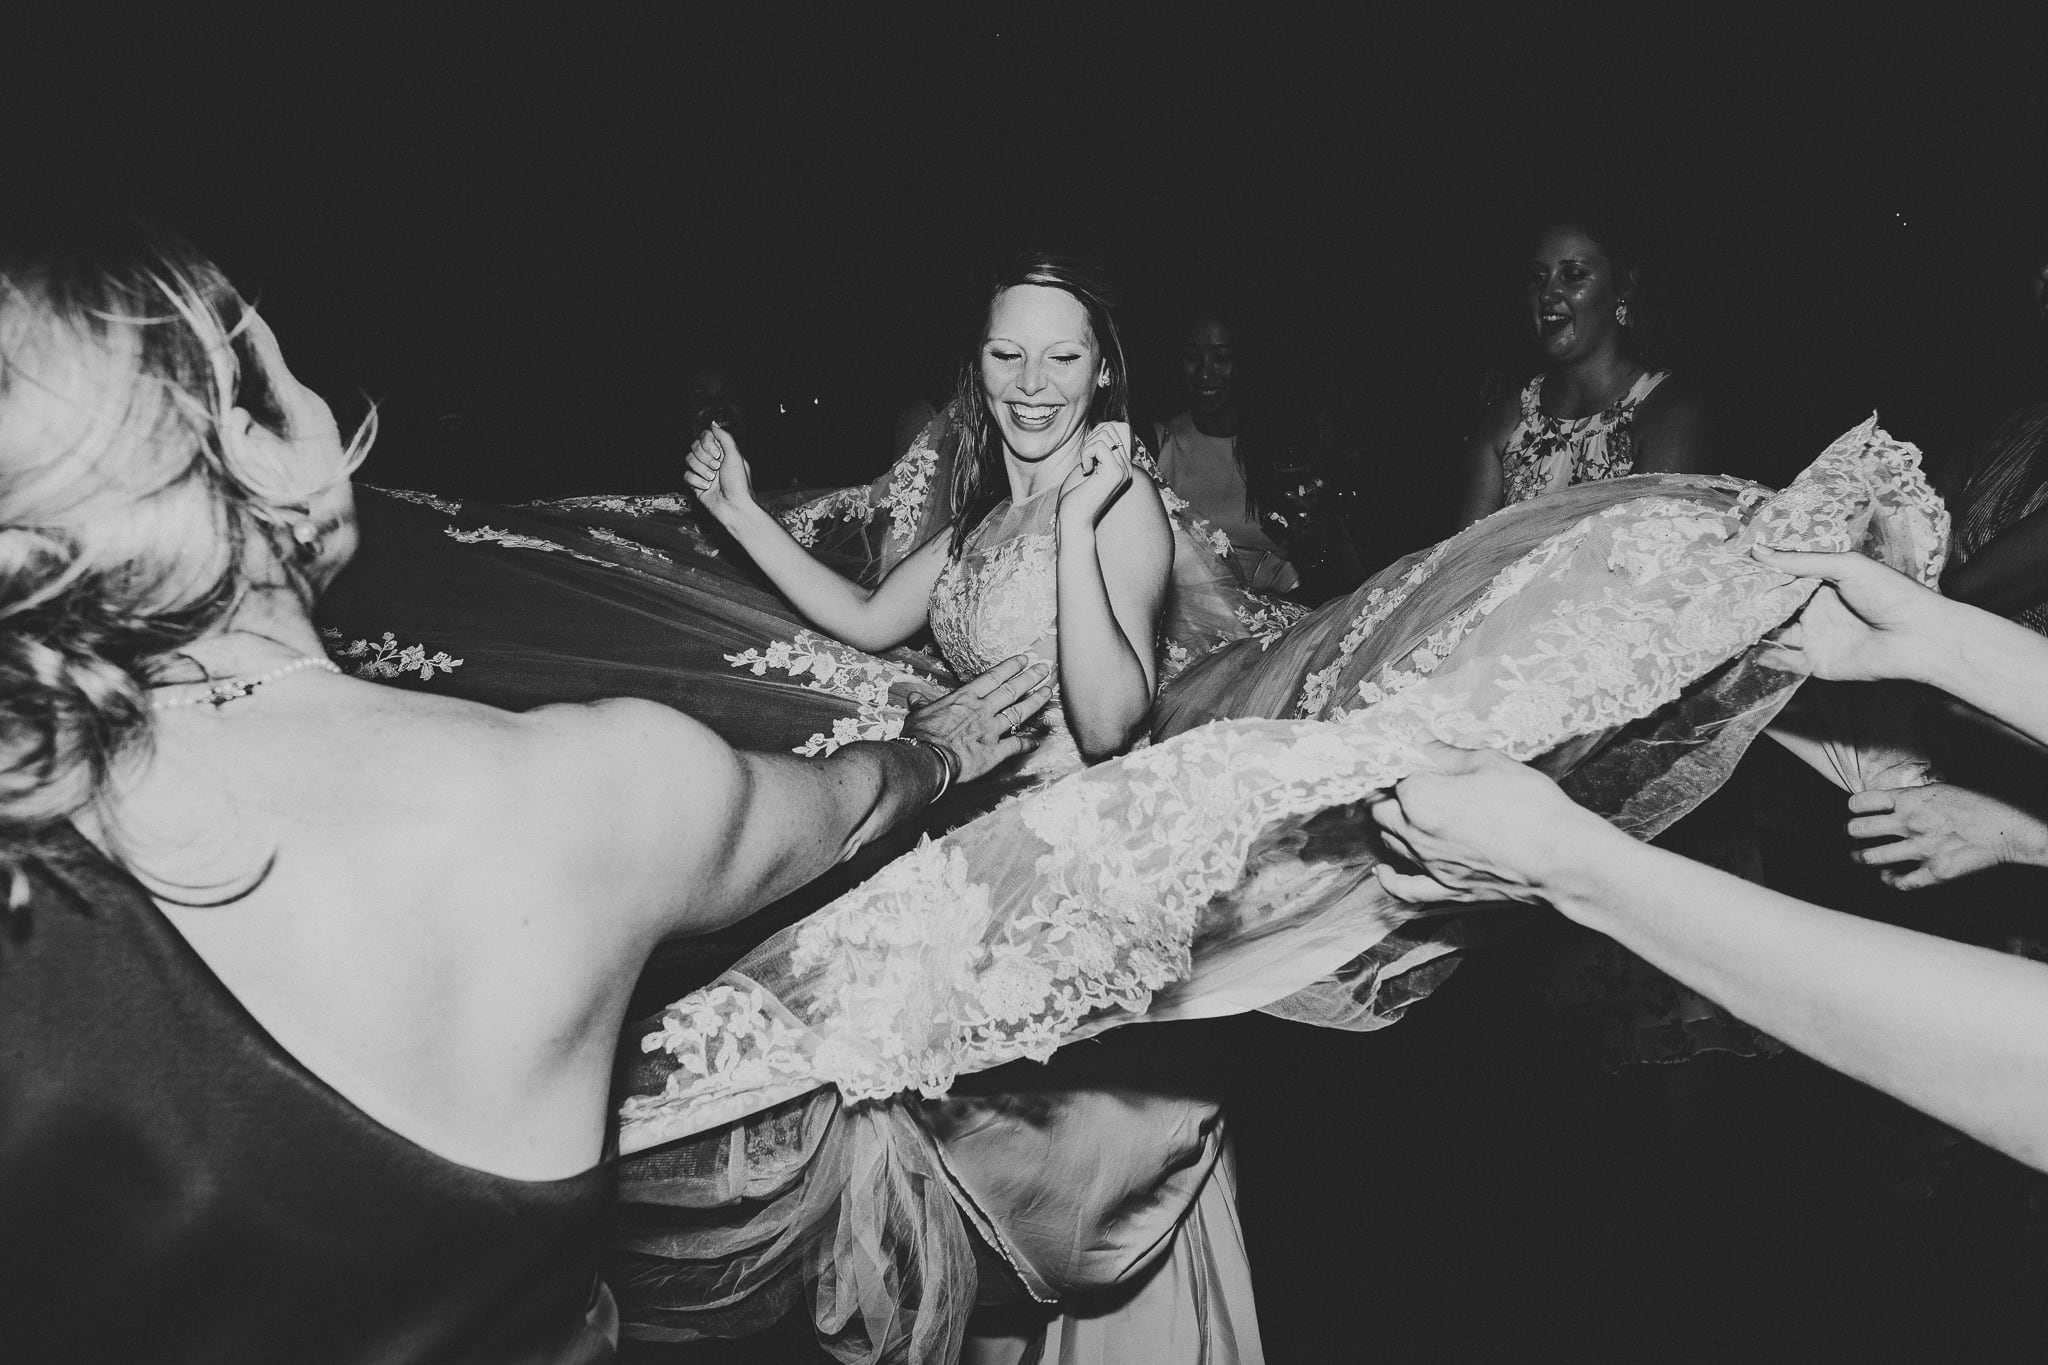 bride dancing in the ring of guests